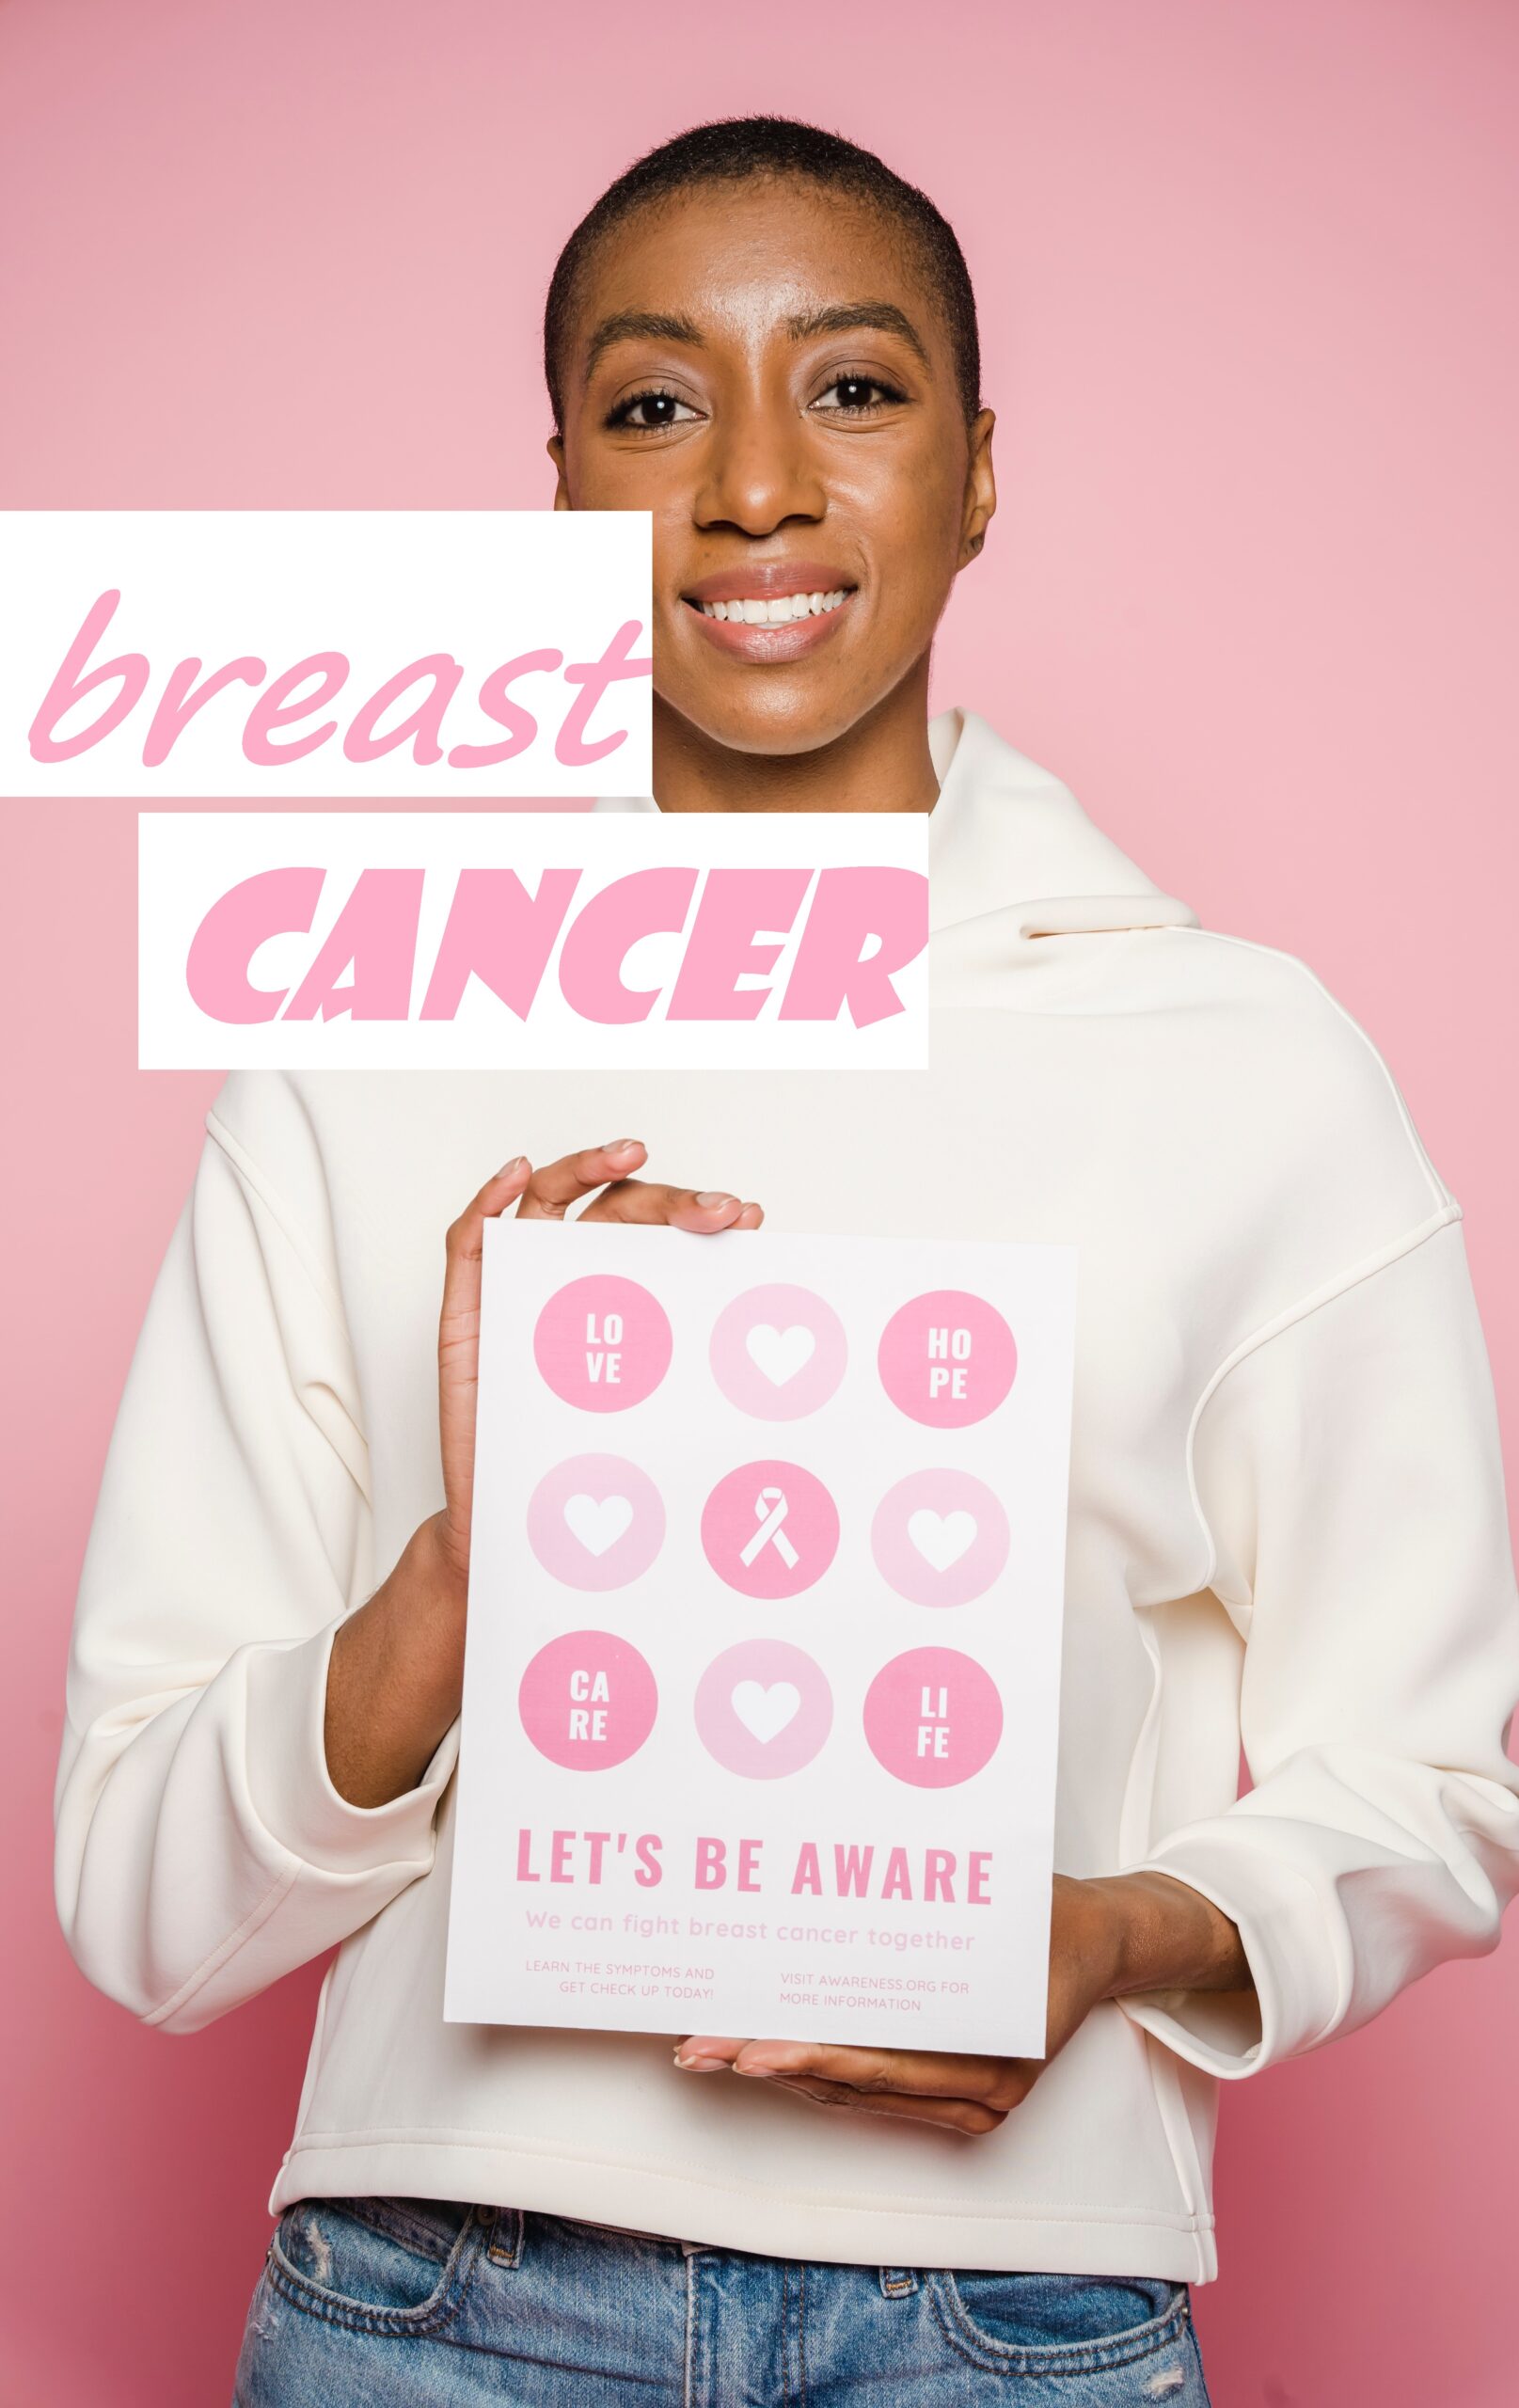 Breast Cancer Awareness: Understanding the Disease and Fighting Back